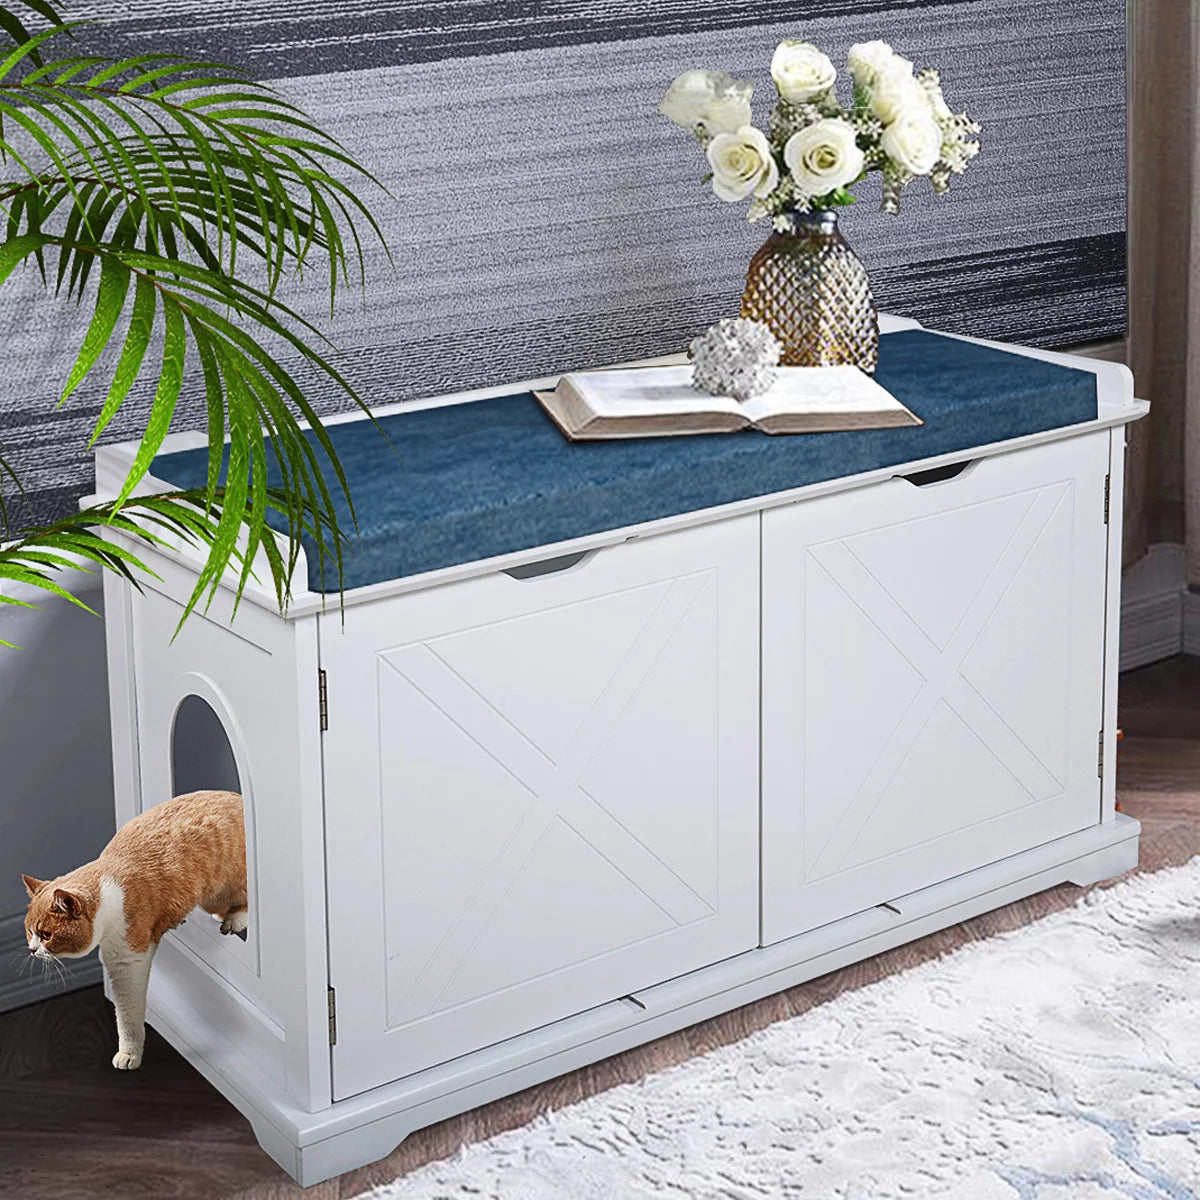 SESSLIFE Cat Hidden Litter Box, 2 in 1 Cat House Furniture and Side Table, 37.3" Large Litter Box Enclosure, White, TE2169